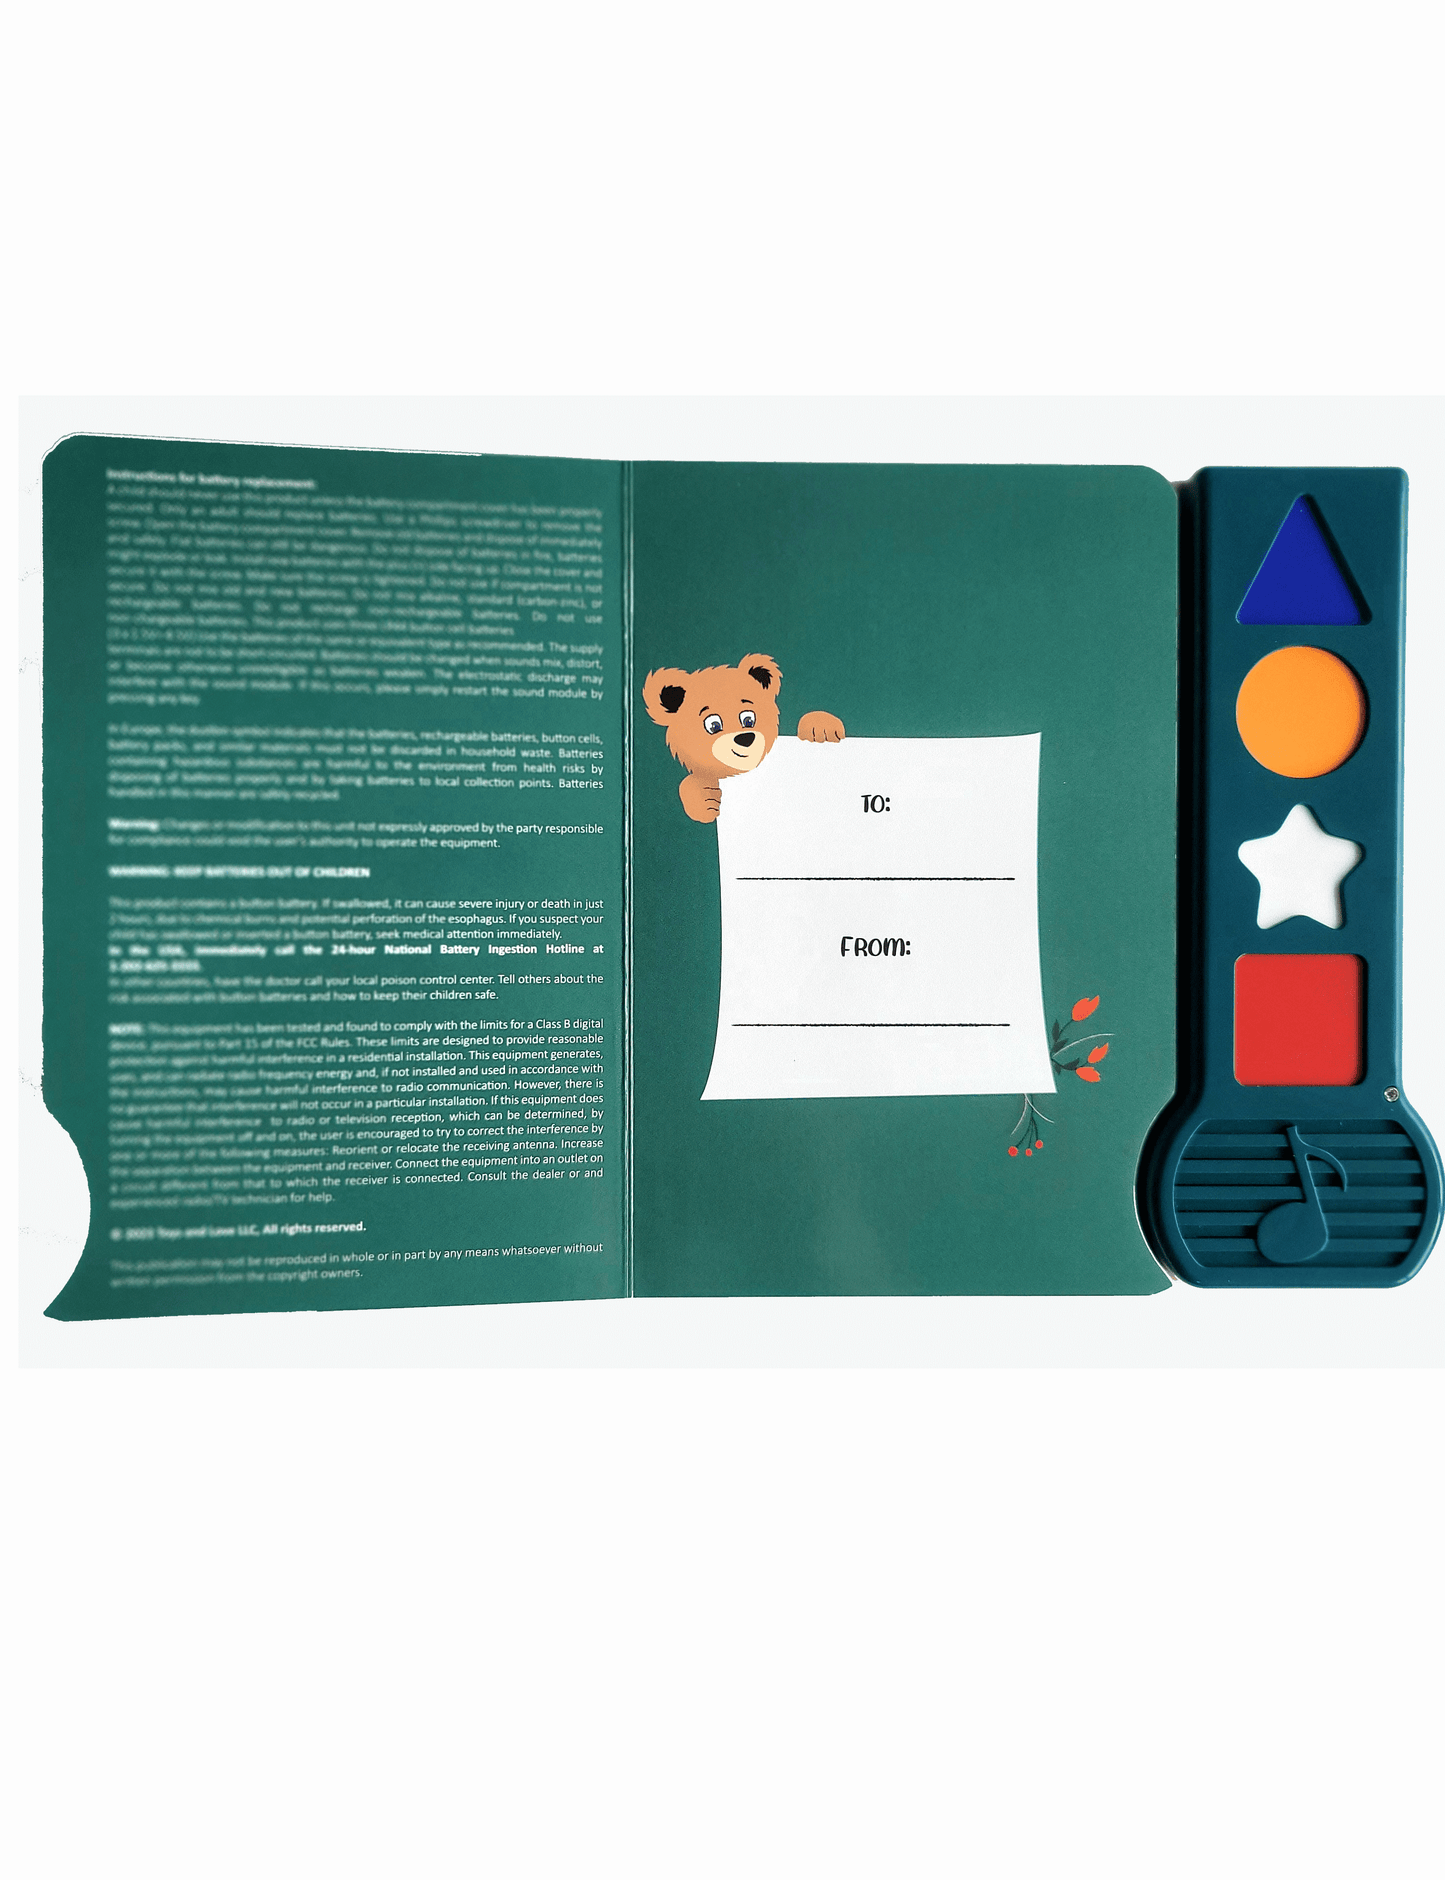 4-button interactive sound book for children with lullabies